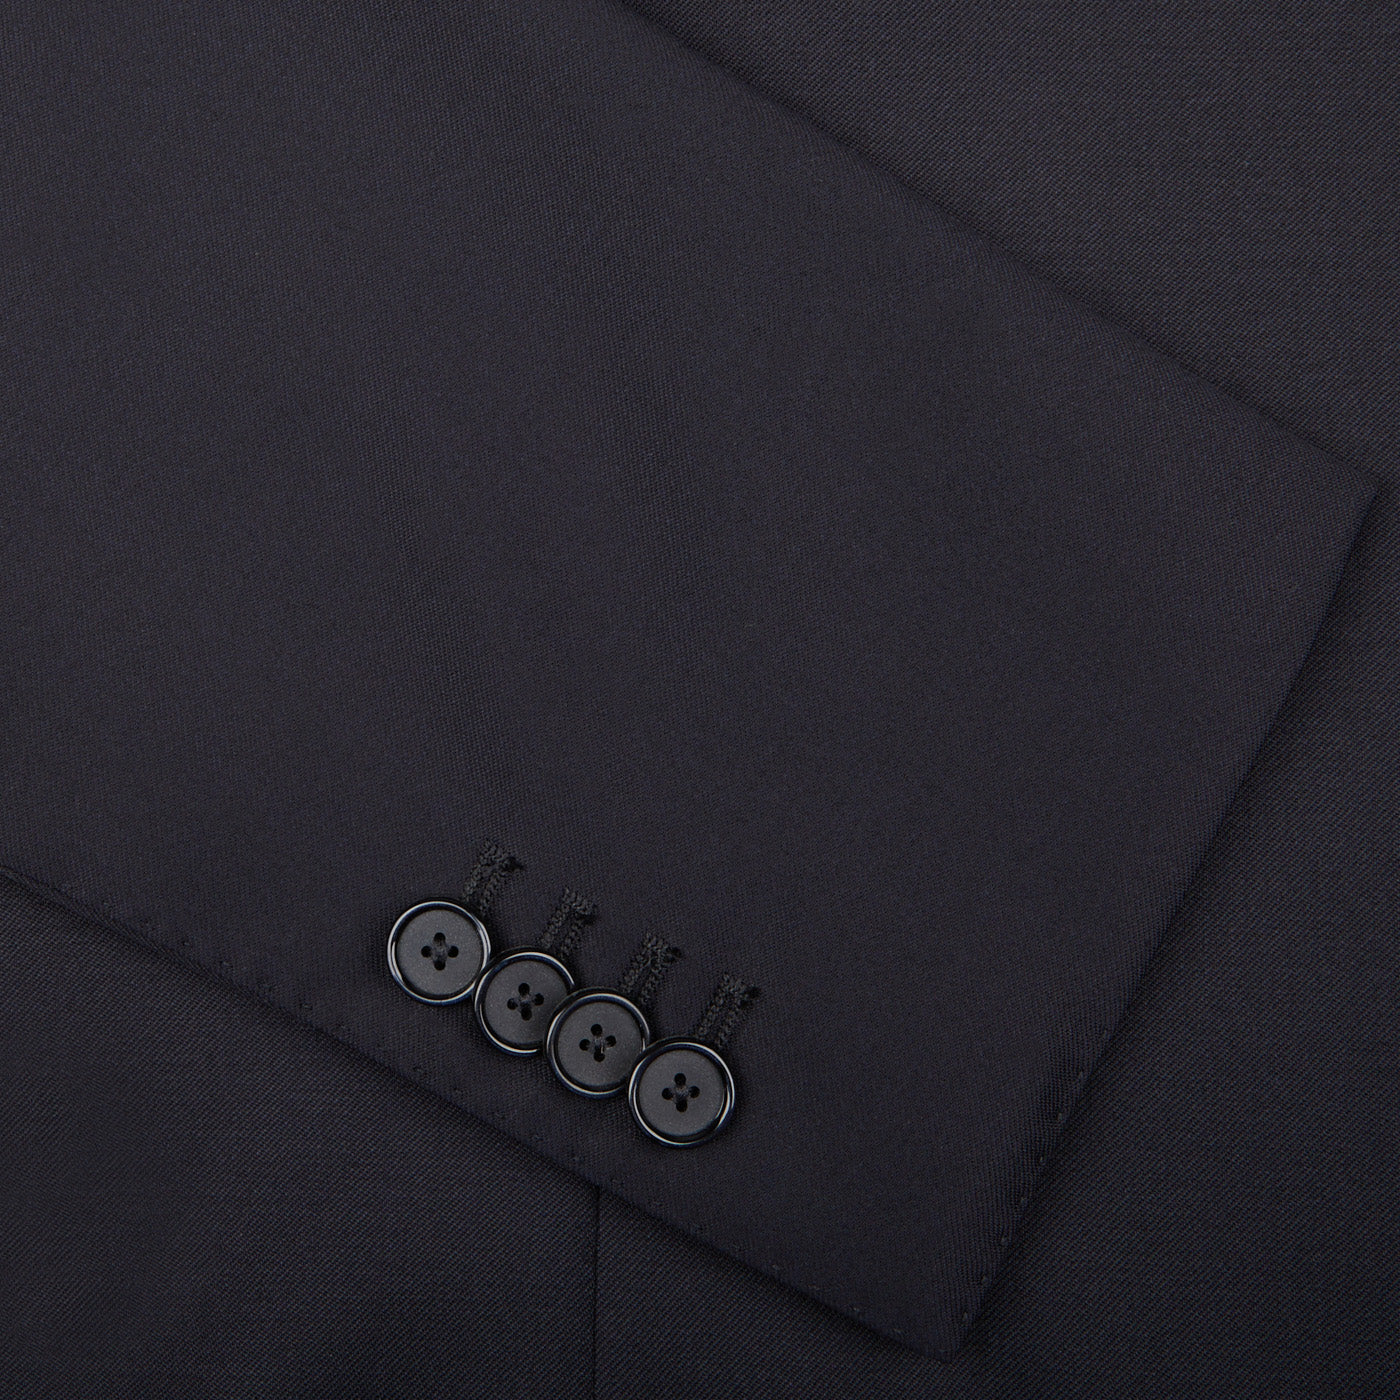 A Tagliatore Midnight Navy Super 110s Wool Suit Jacket, crafted from worsted semi-shiny 100% wool fabric, showcasing a stylish button detail.